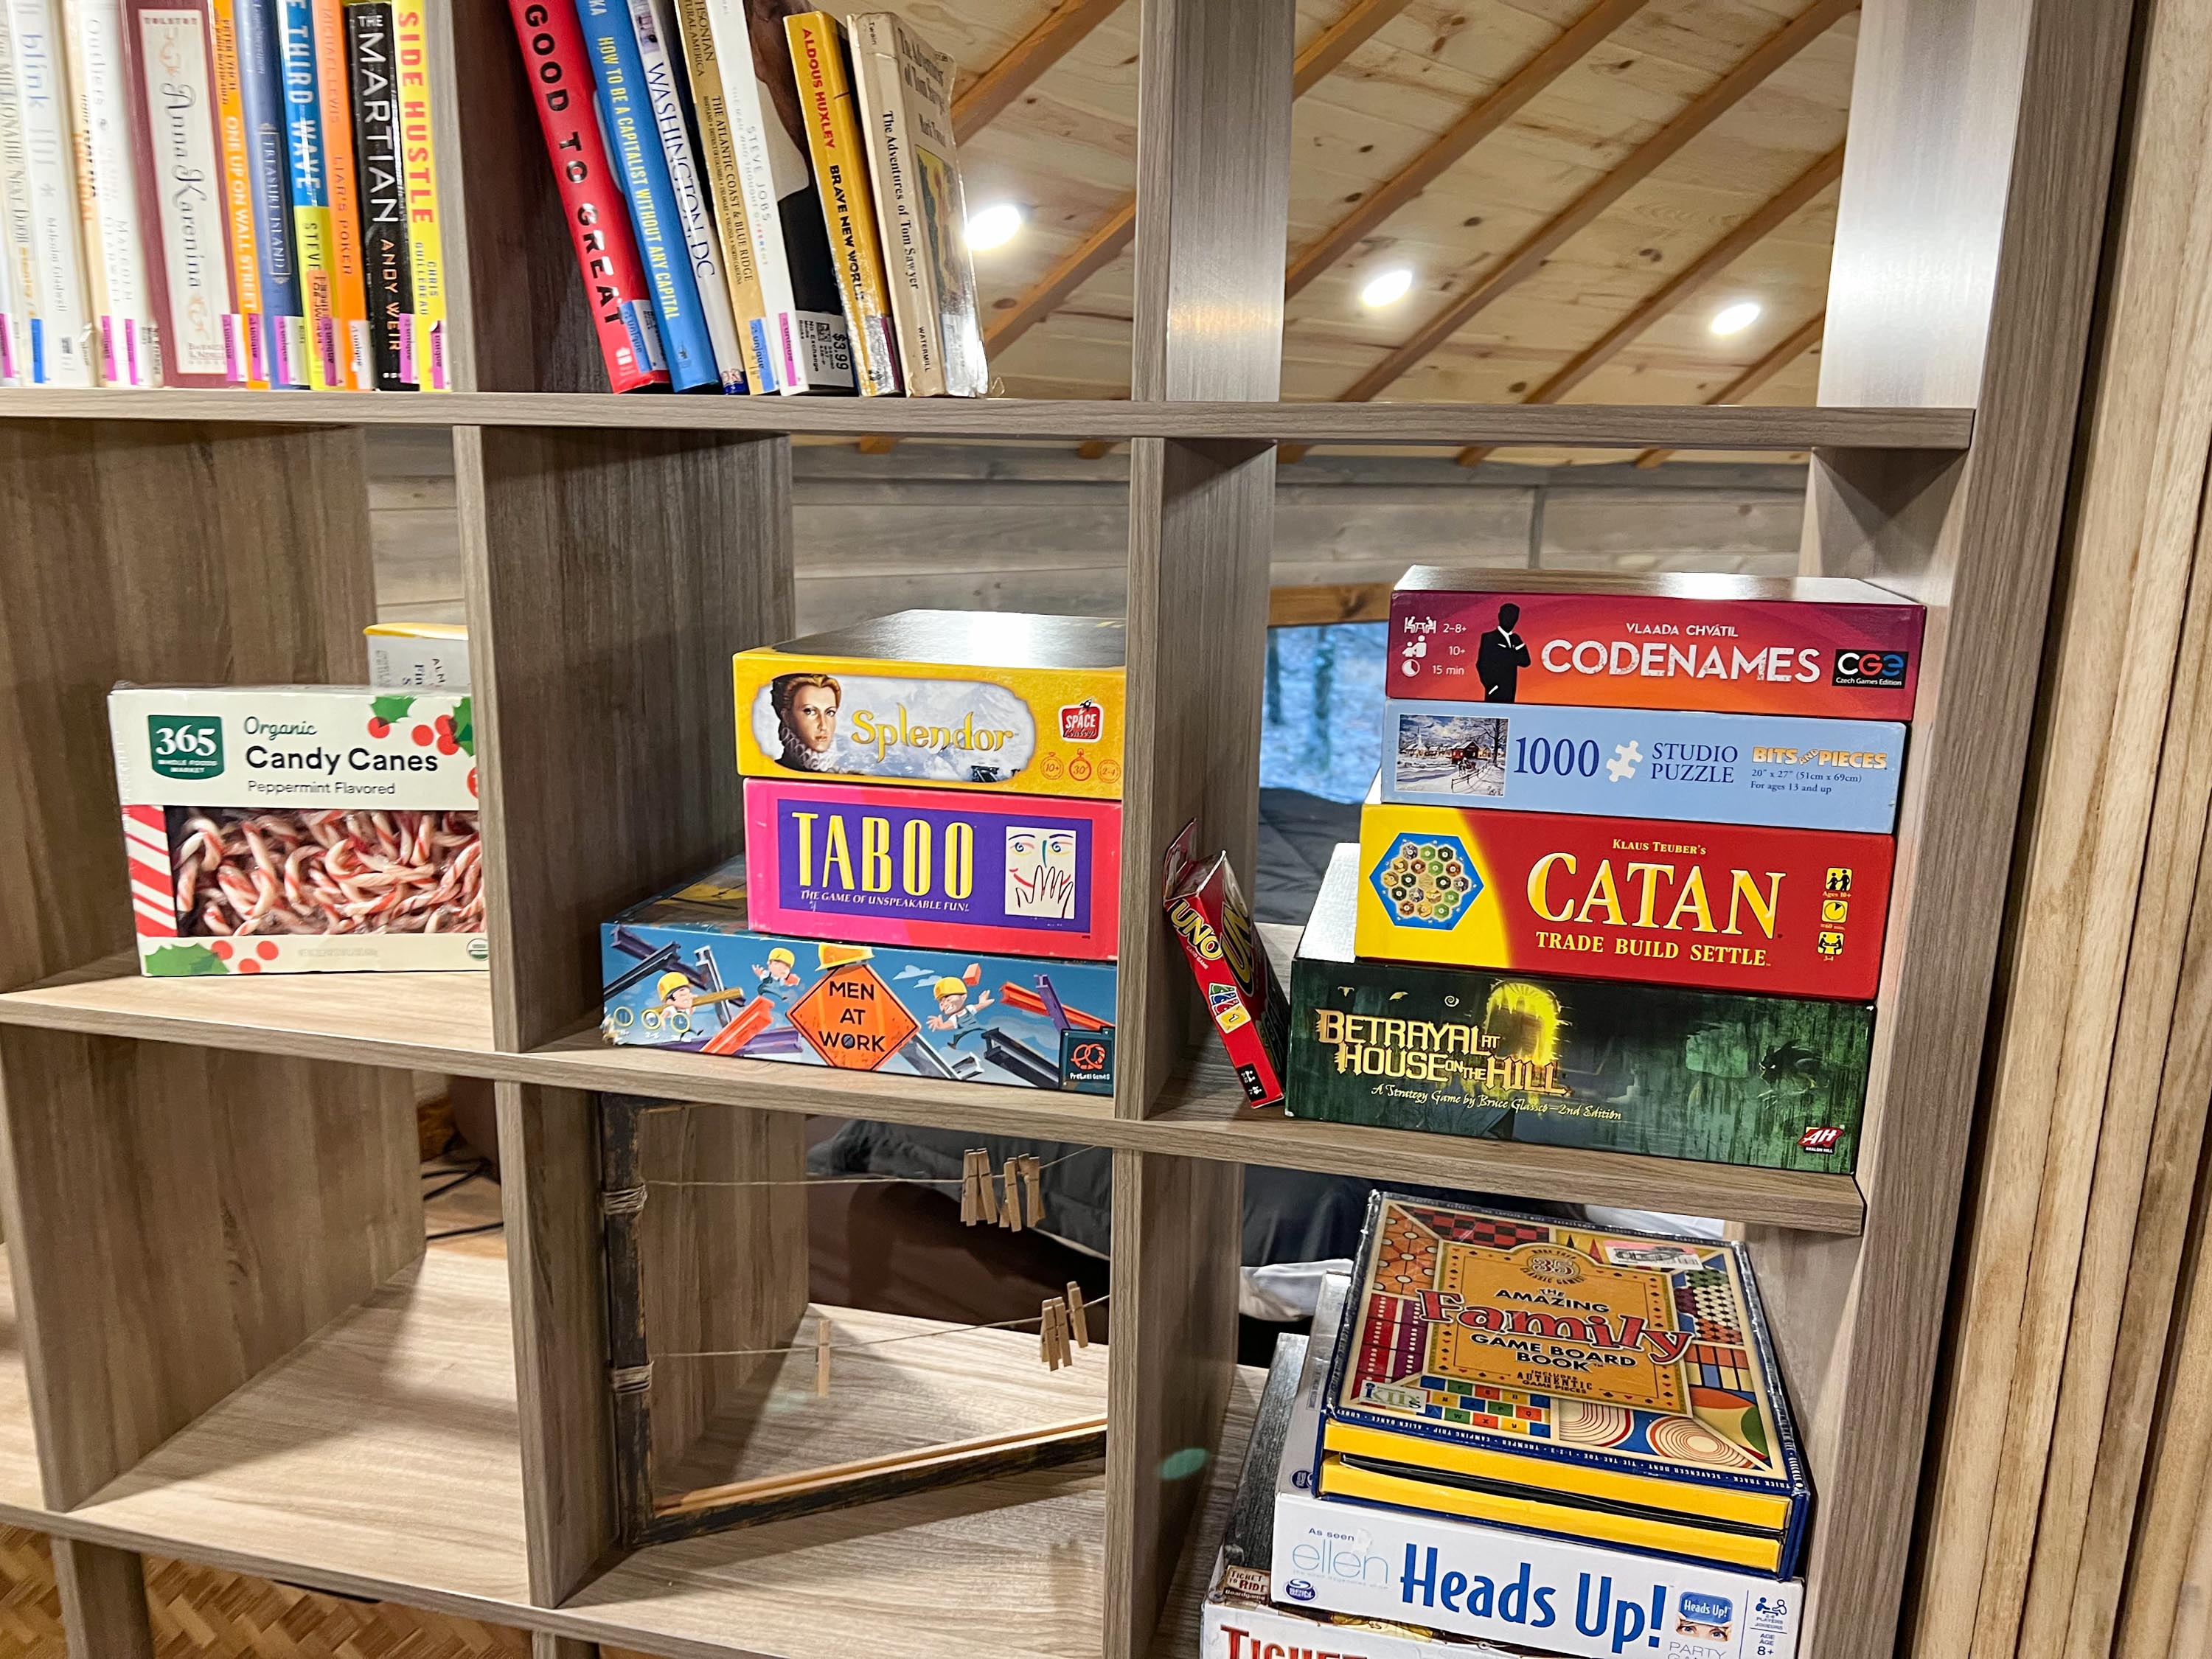 <span  class="uc_style_uc_tiles_grid_image_elementor_uc_items_attribute_title" style="color:#ffffff;">Great board games! How about Catan, Codenames, Ticket to Ride, Uno, Heads Up and so much more?!</span>